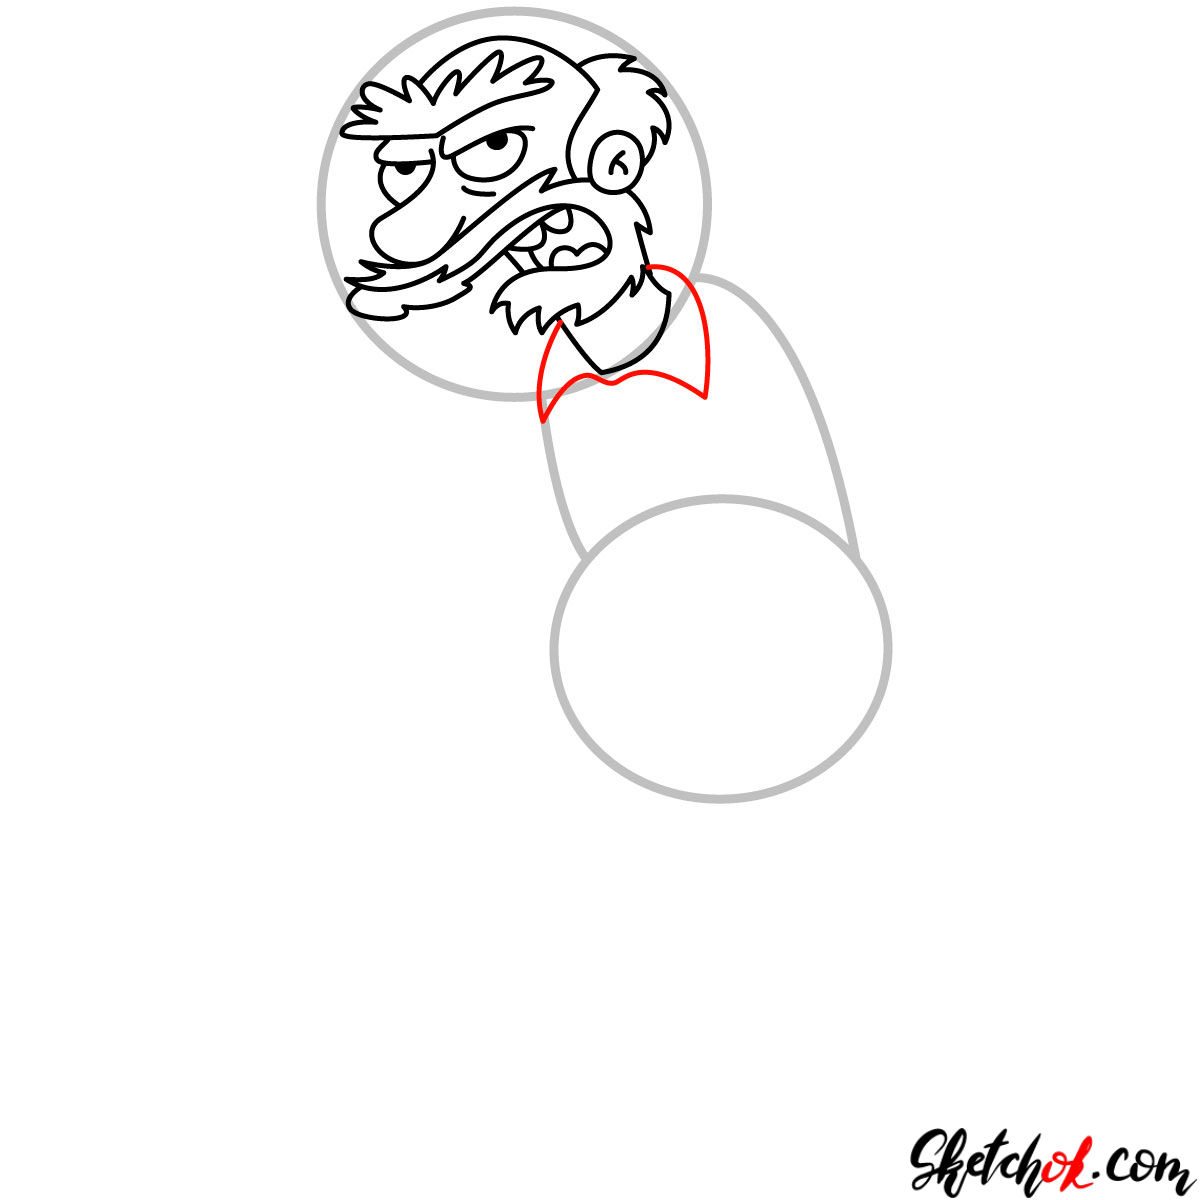 How to draw Groundskeeper Willie with a shovel - step 06